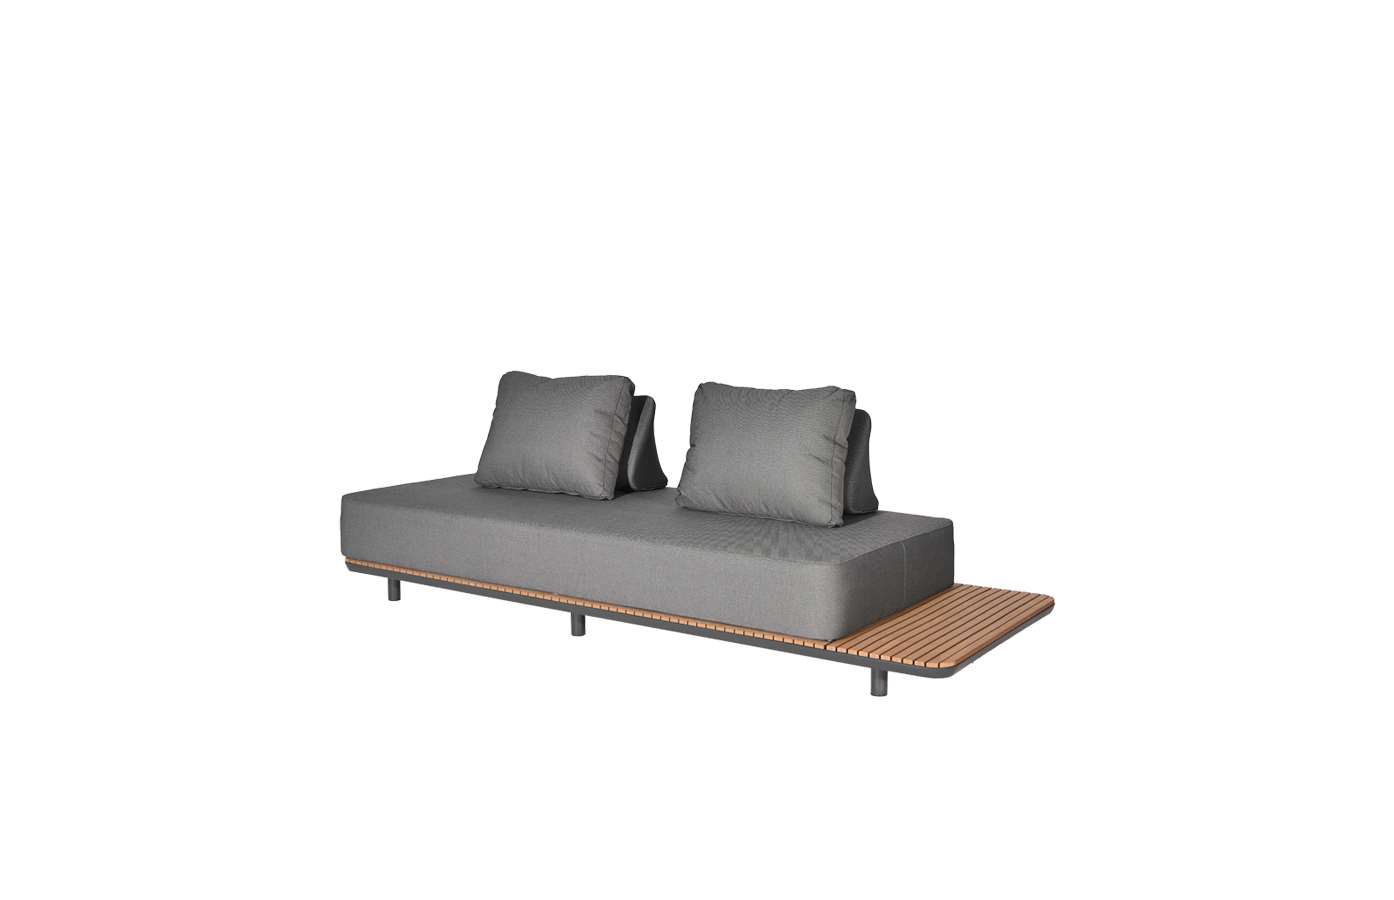 New Freedom Sofa Featured Image